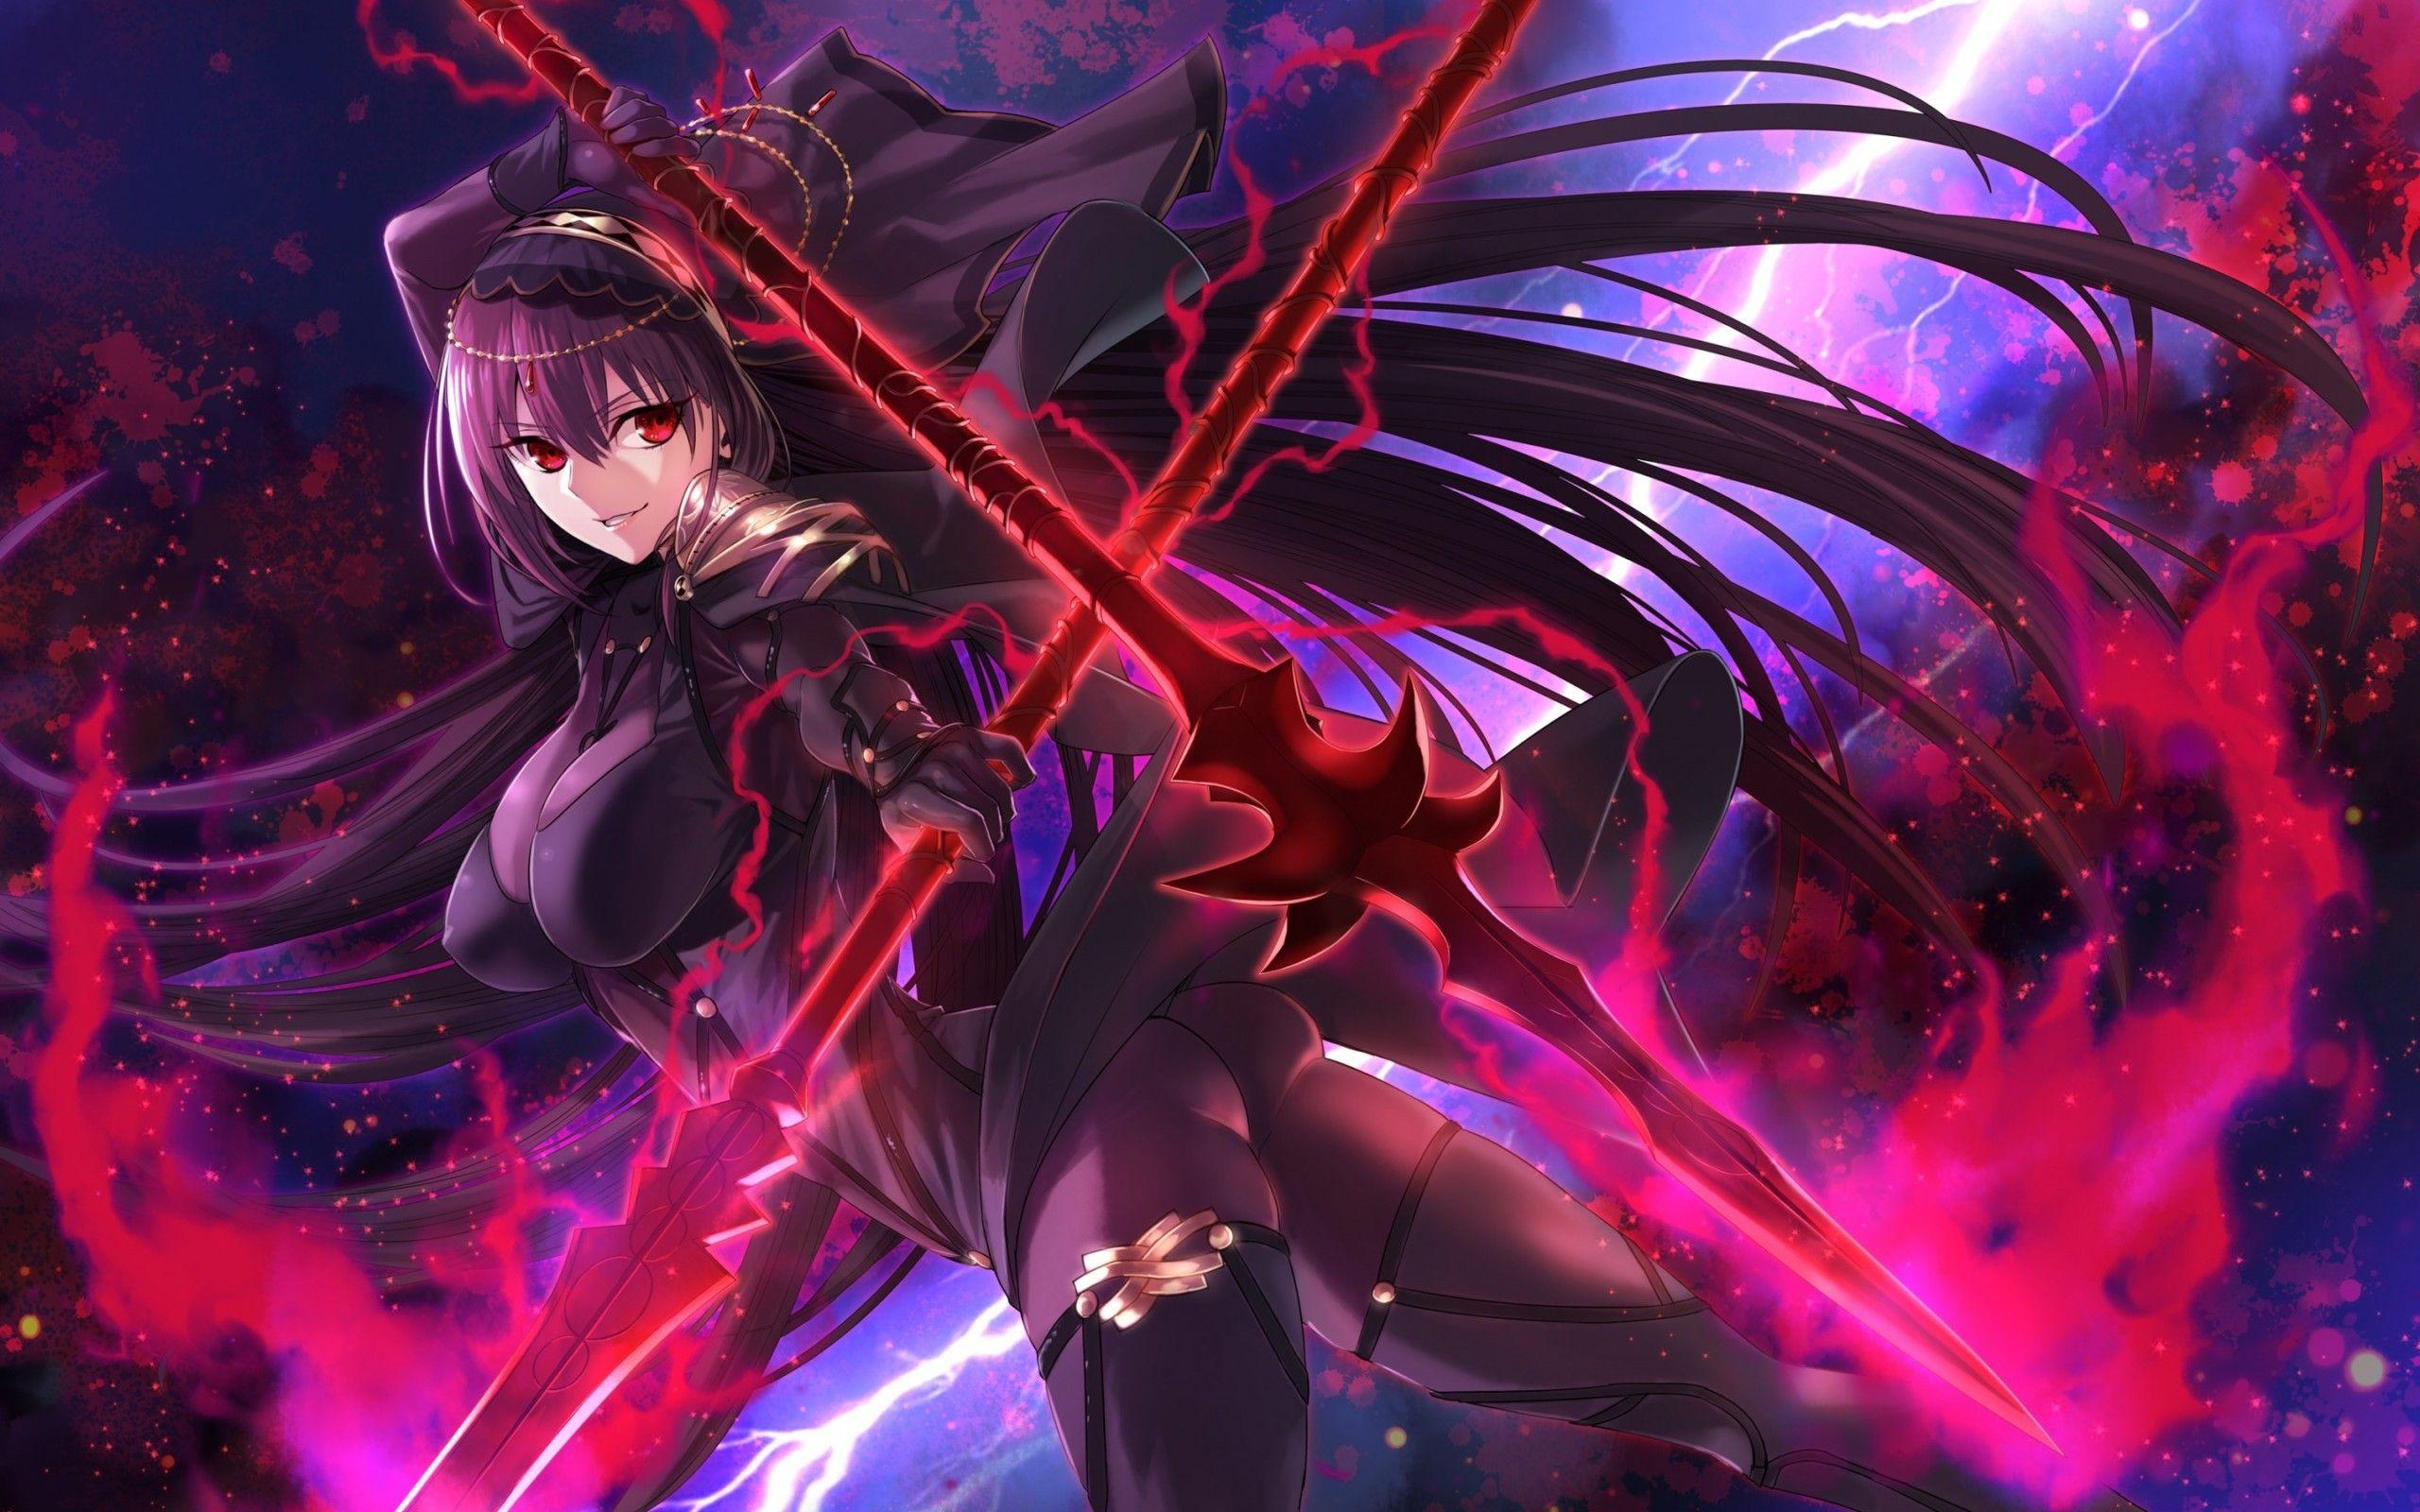 Fate Grand Order Wallpapers Top Free Fate Grand Order Backgrounds Wallpaperaccess